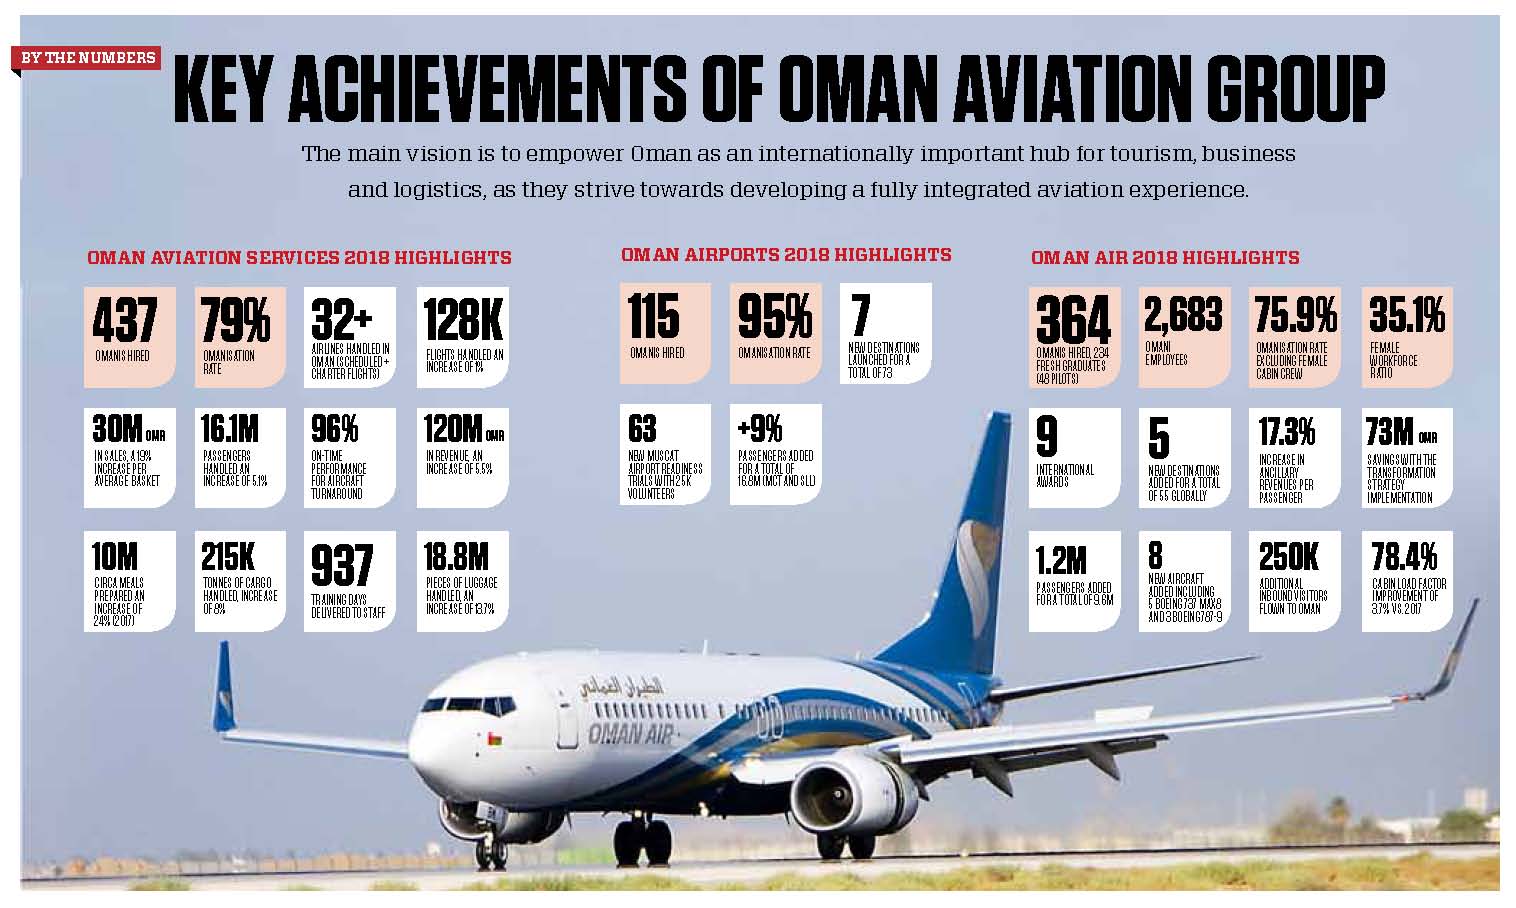 Oman Aviation Group launches revamped brand identity